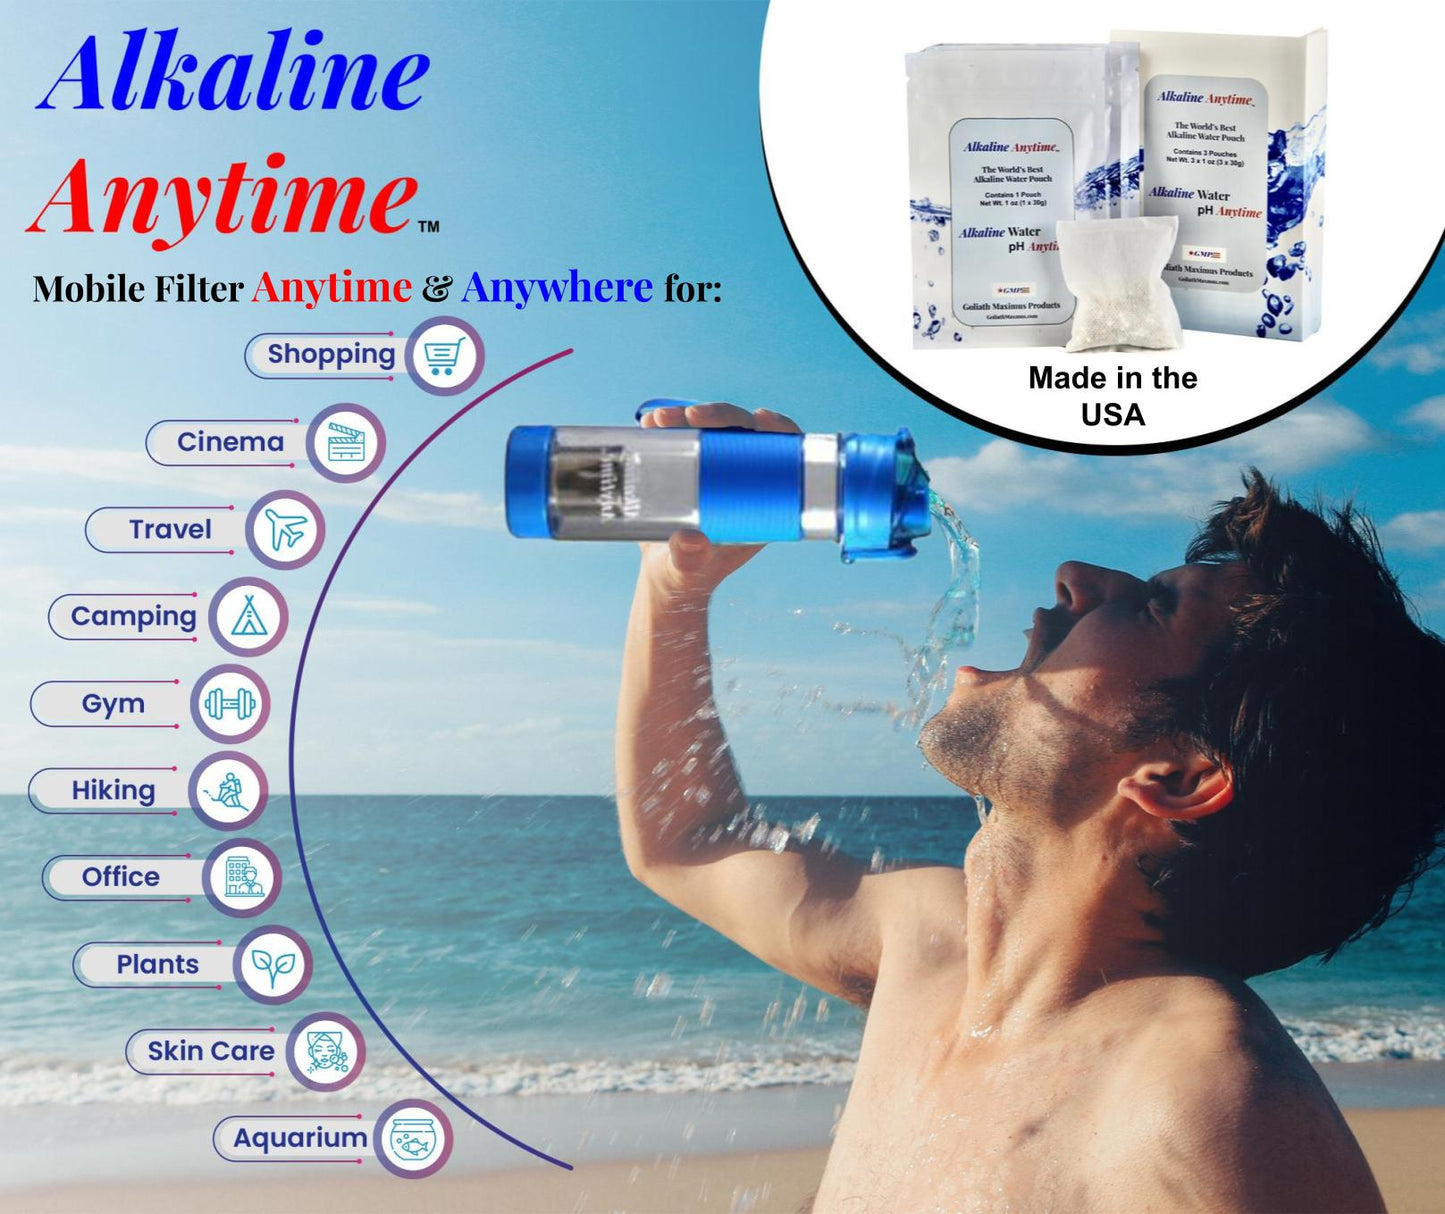 Alkaline Anytime The Best Water Filter Pouch for Alkaline Water